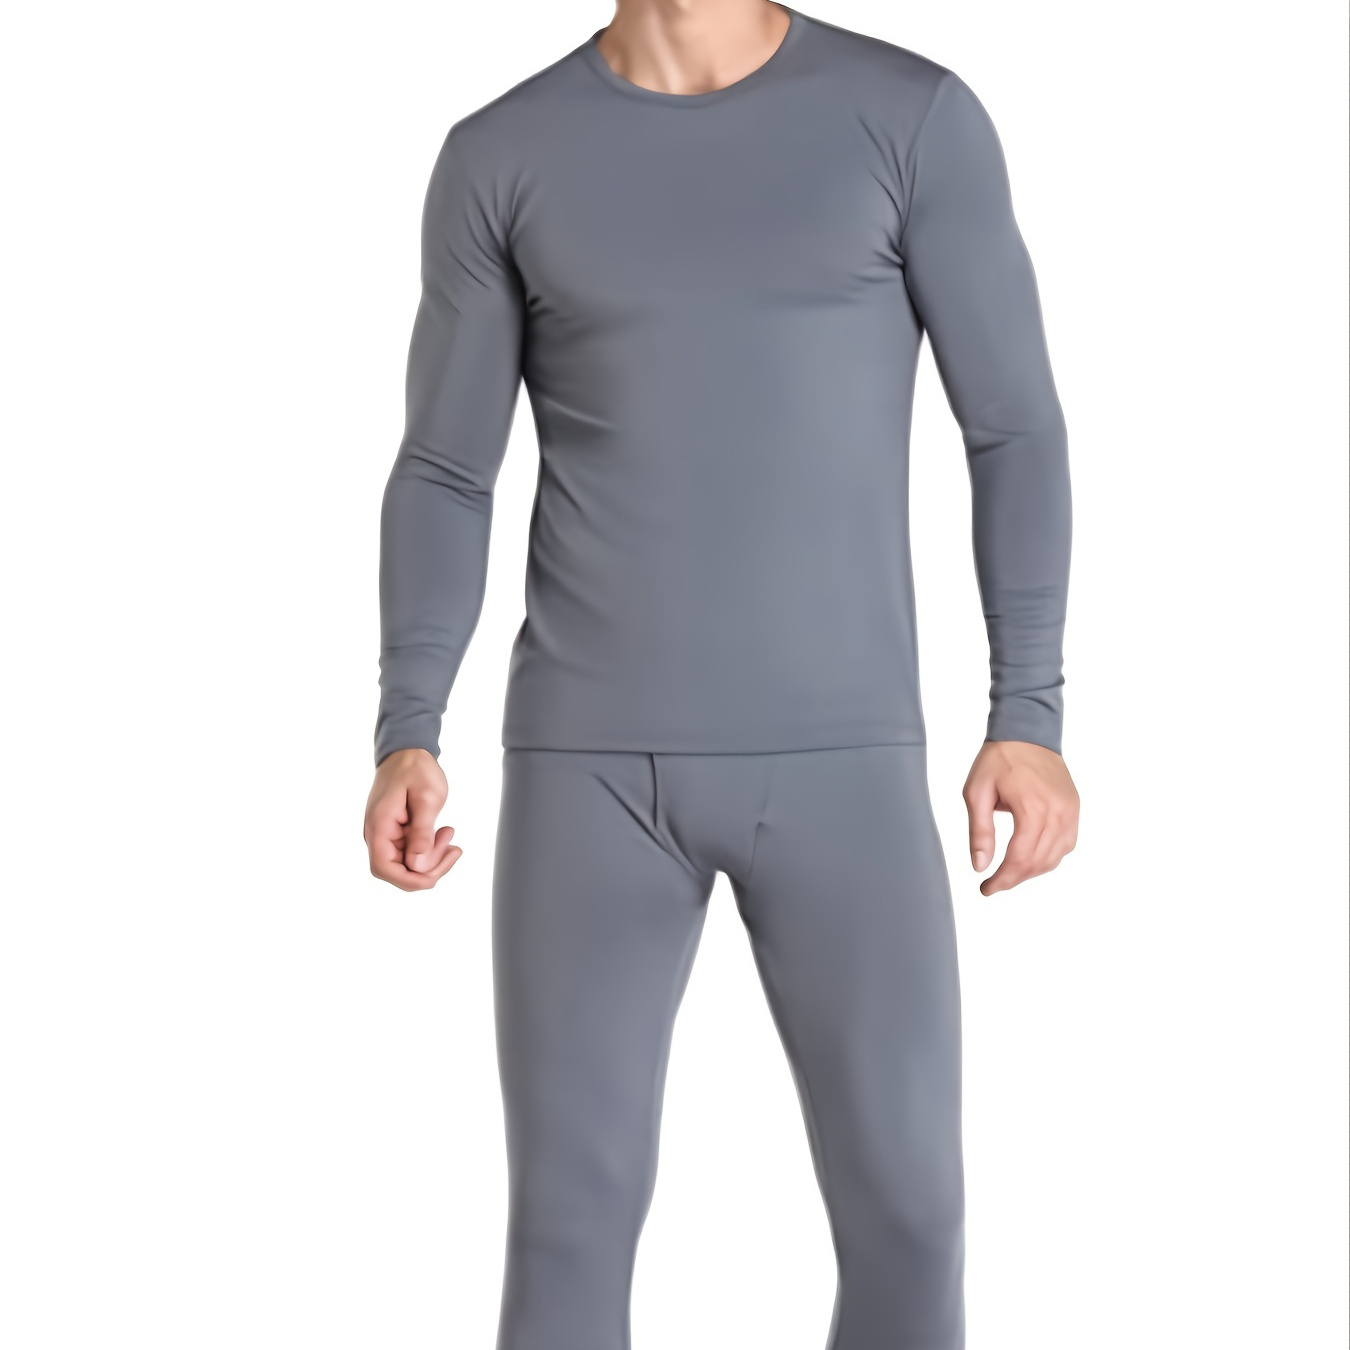 13 Best Thermal Underwear for Men (aka Long Johns or Base Layers)